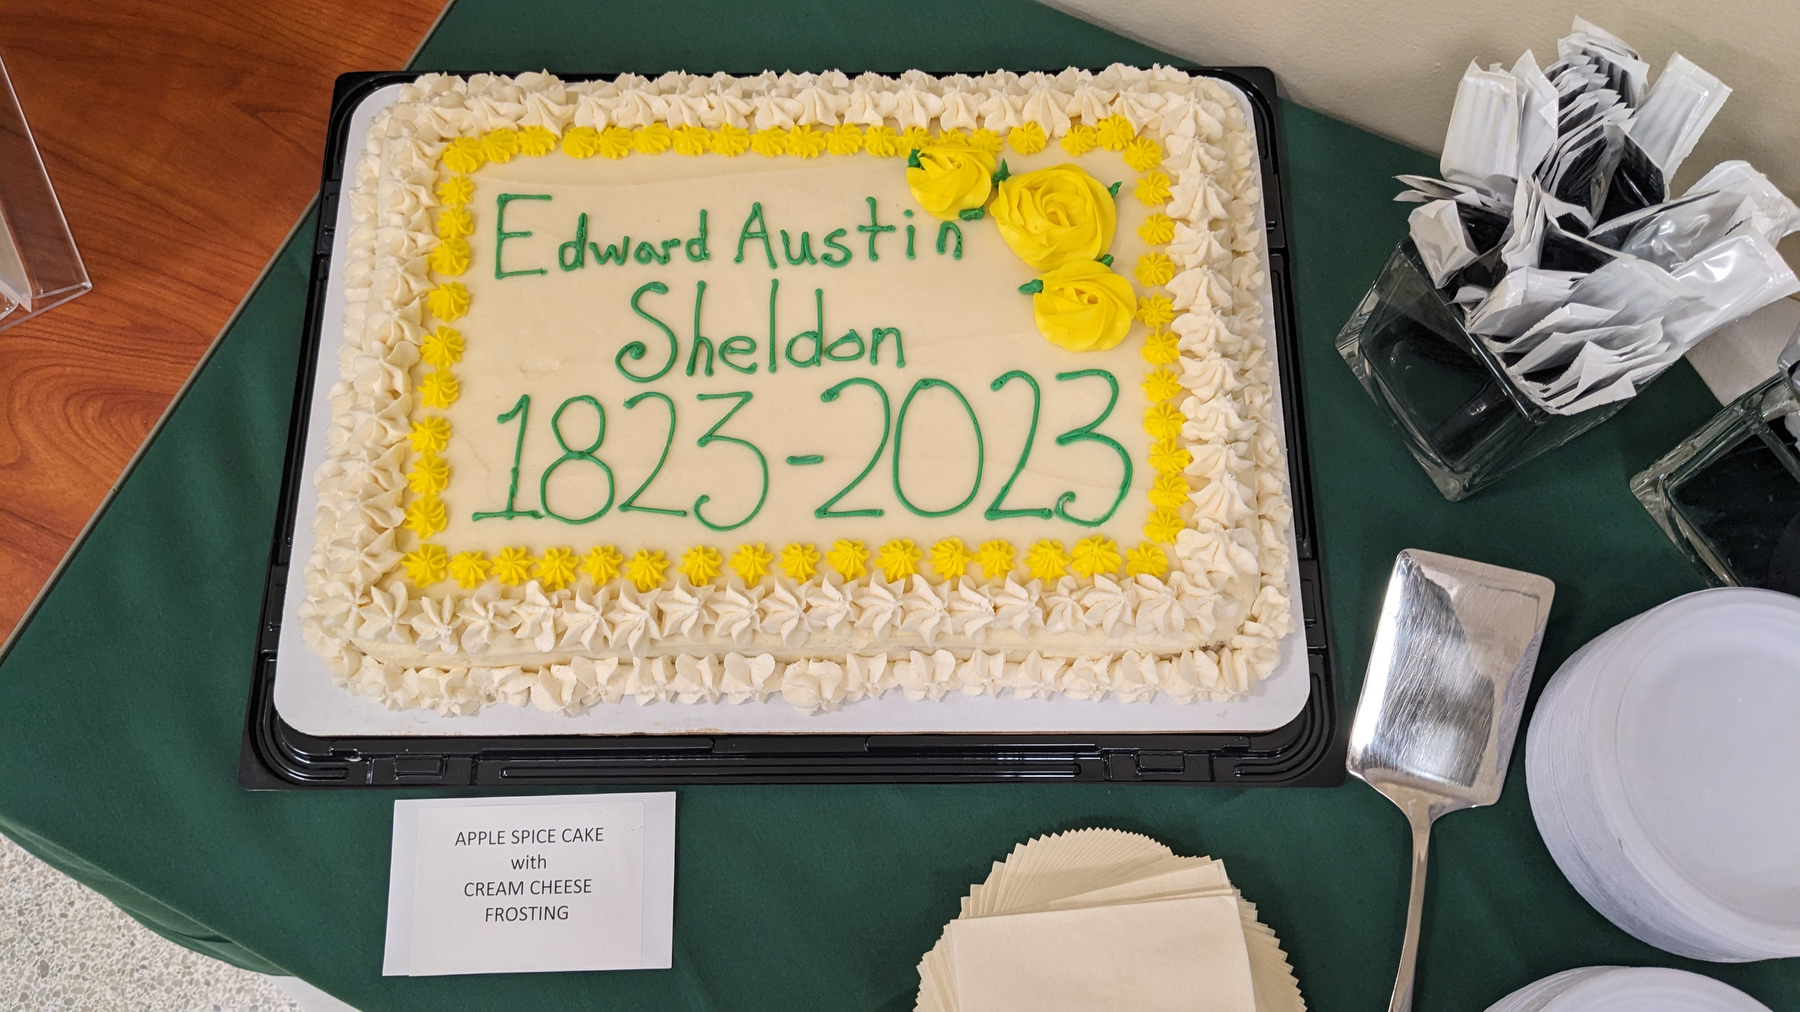 Birthday cakes in Penfield Library highlight the 200th birthday celebration in honor of the institution’s founder Edward Austin Sheldon, who was born on Oct. 4, 1823.